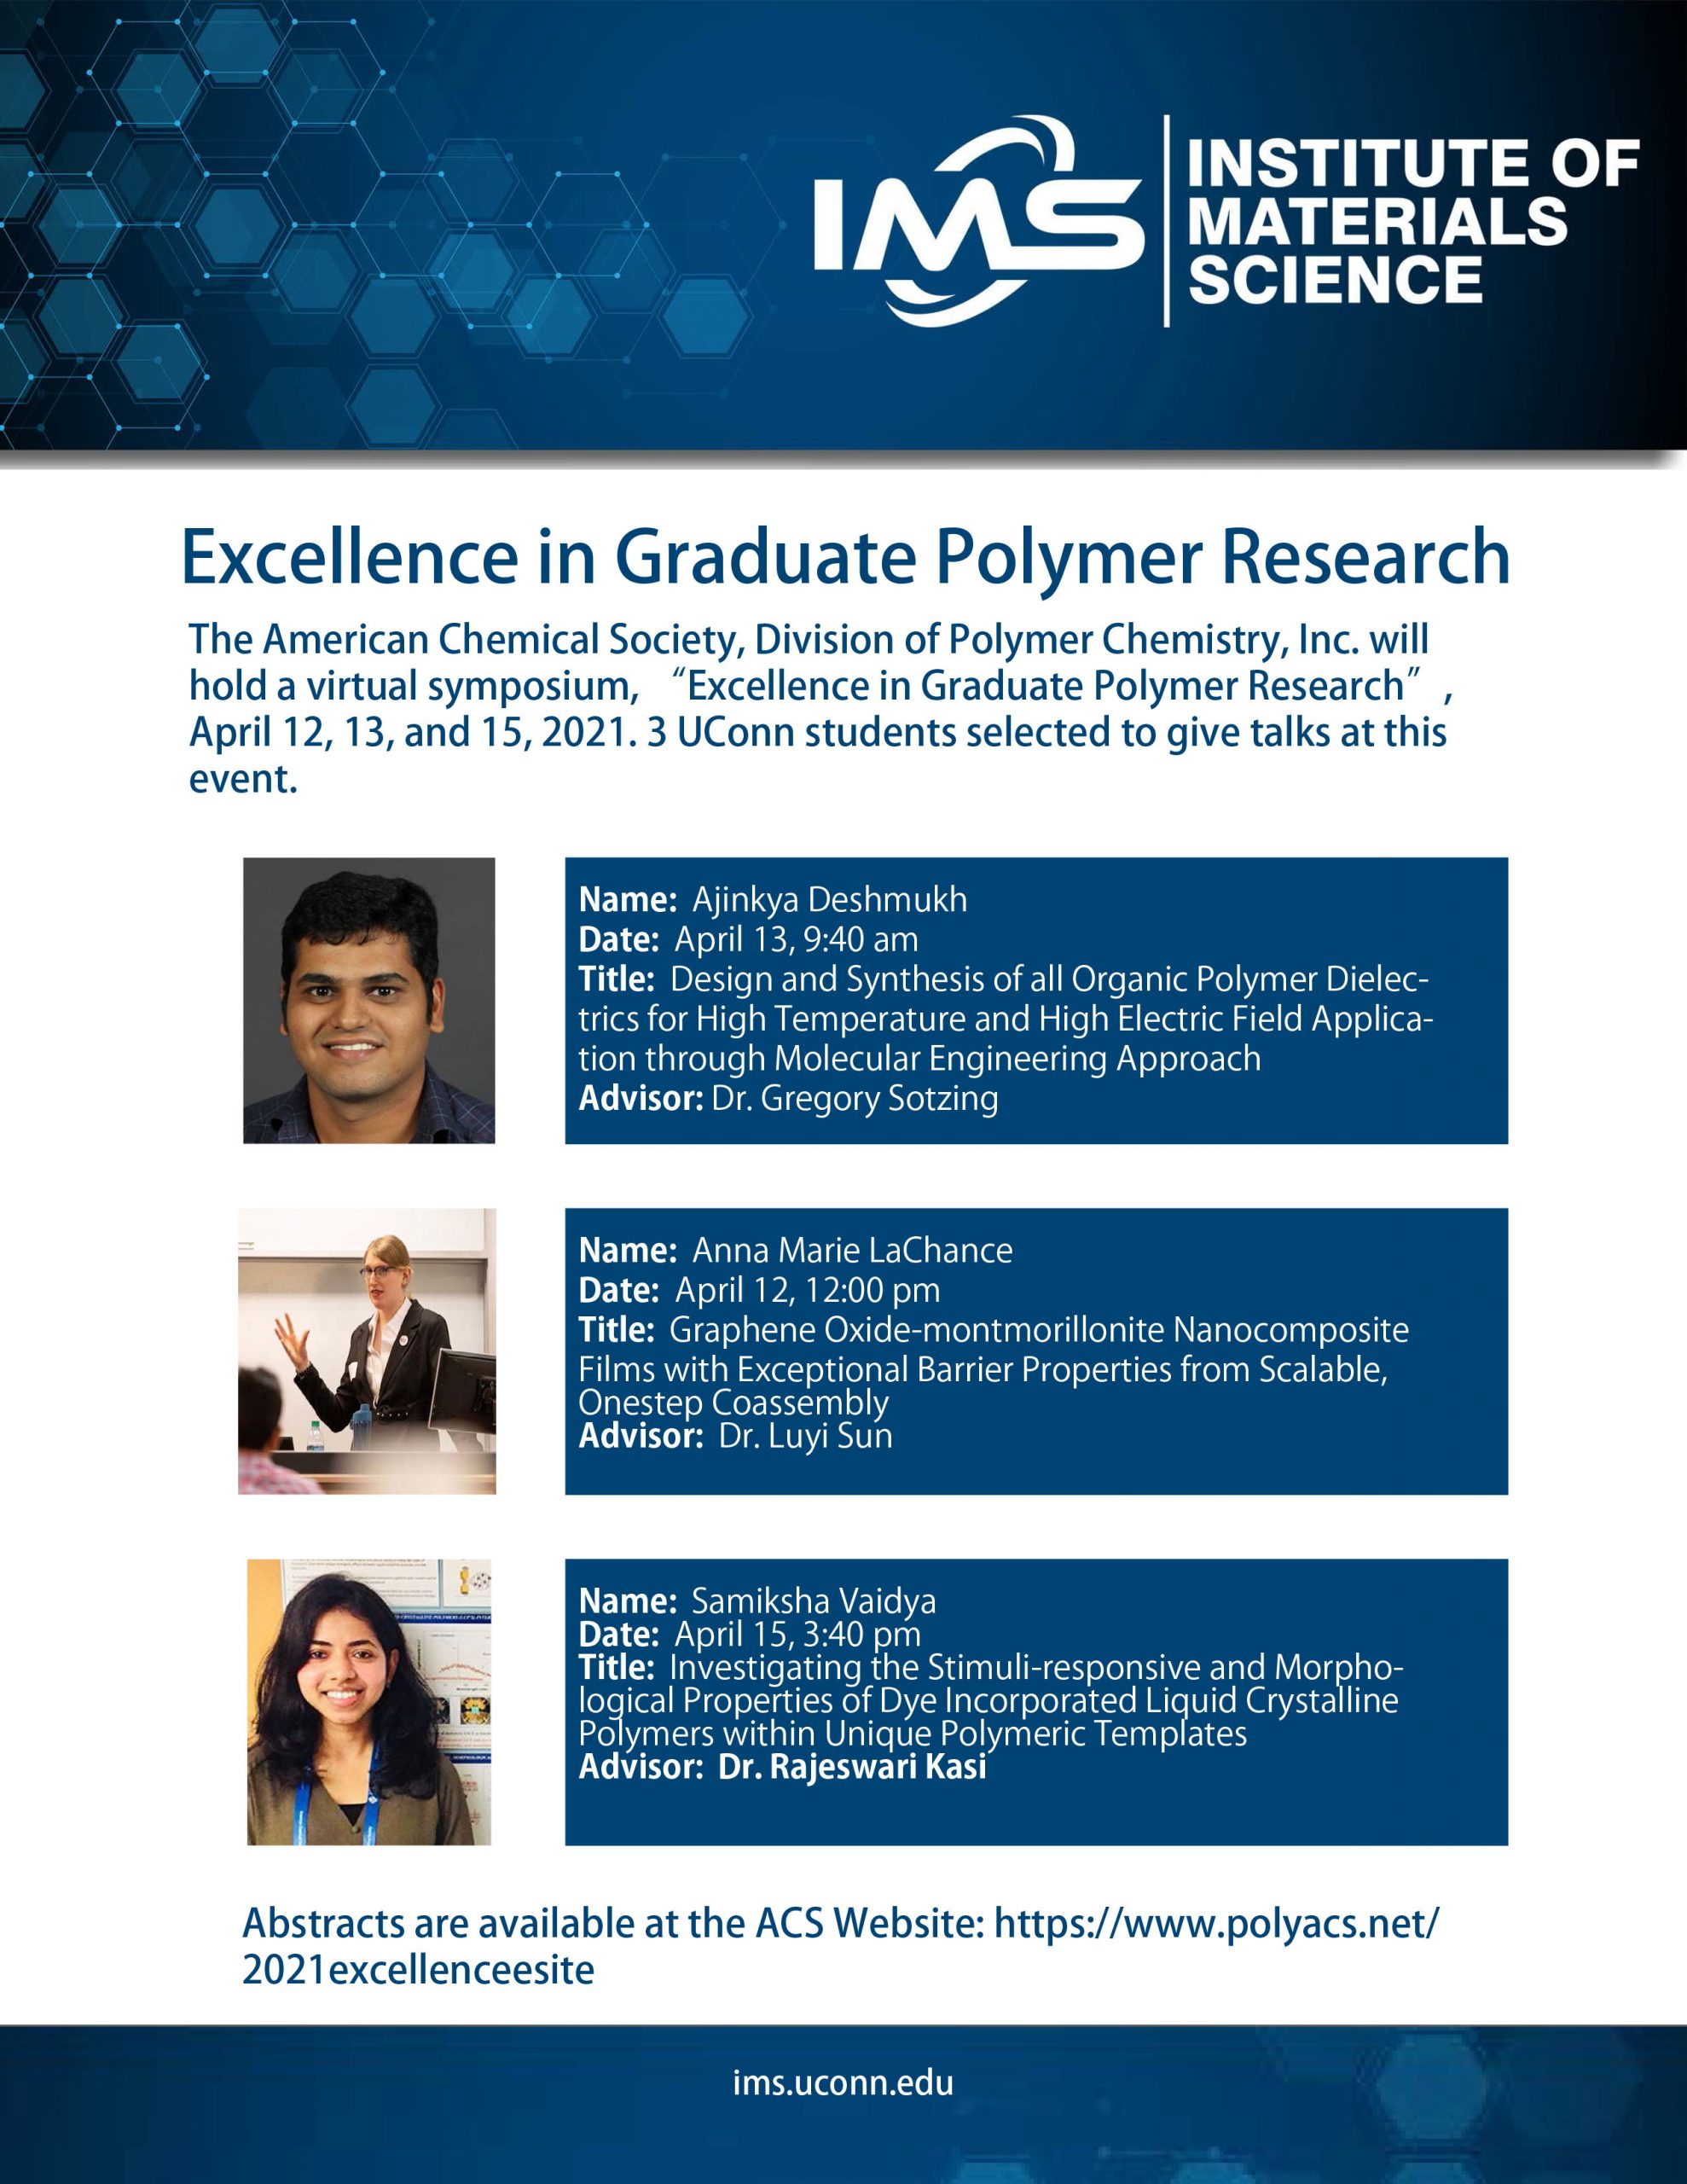 Excellence in Graduate Polymer Research Event